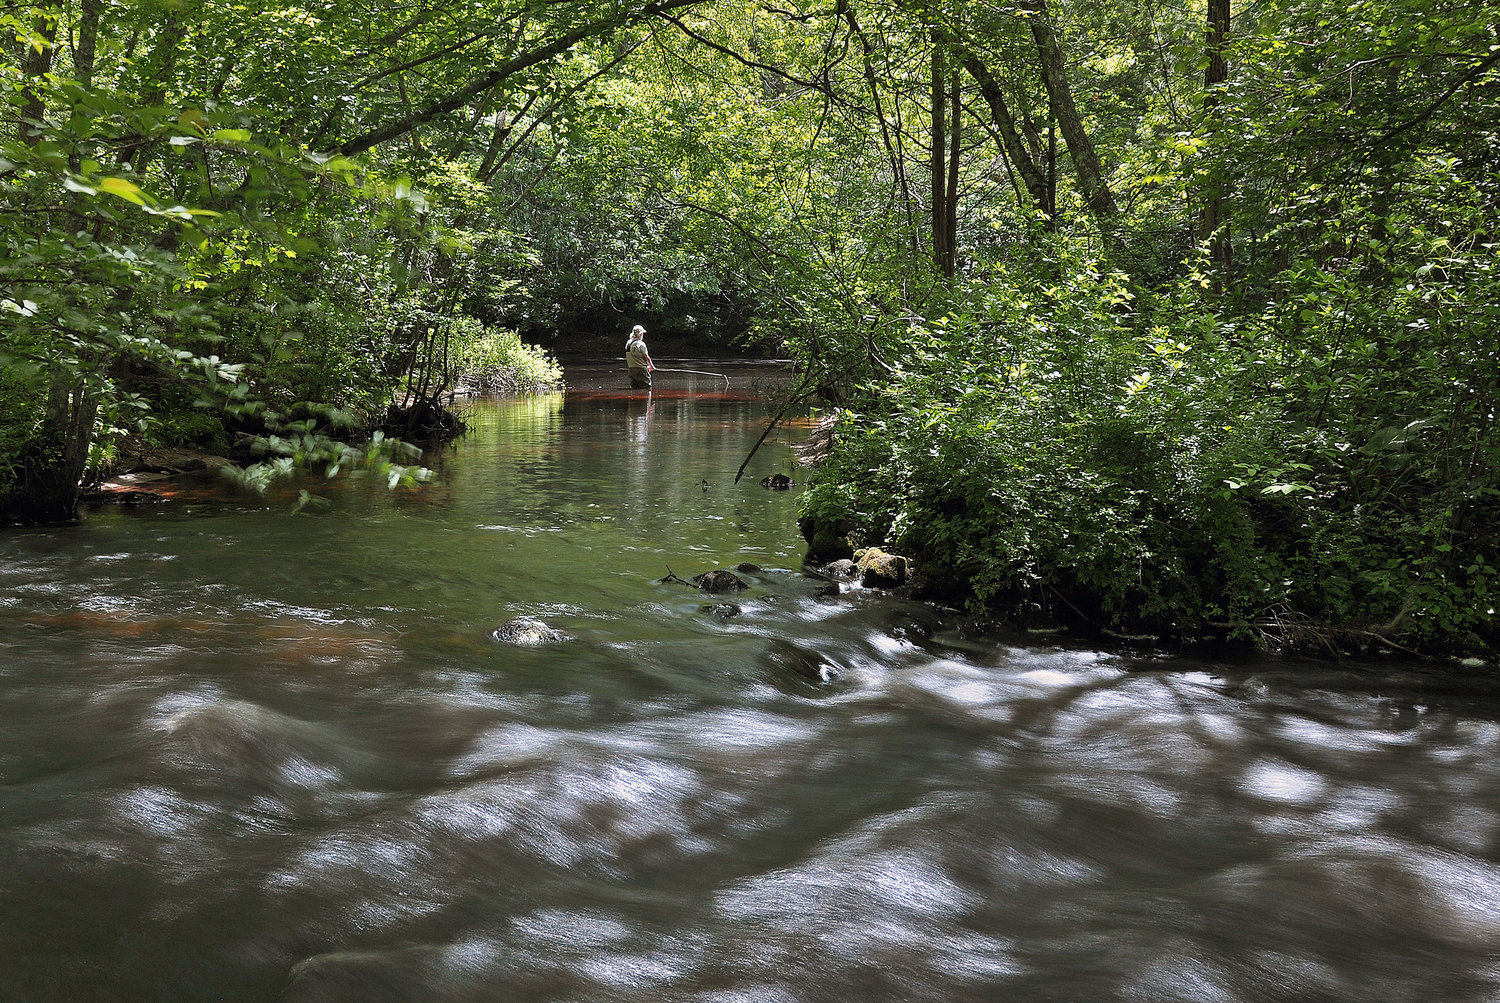 Wood River is among those designated a Wild and Scenic River